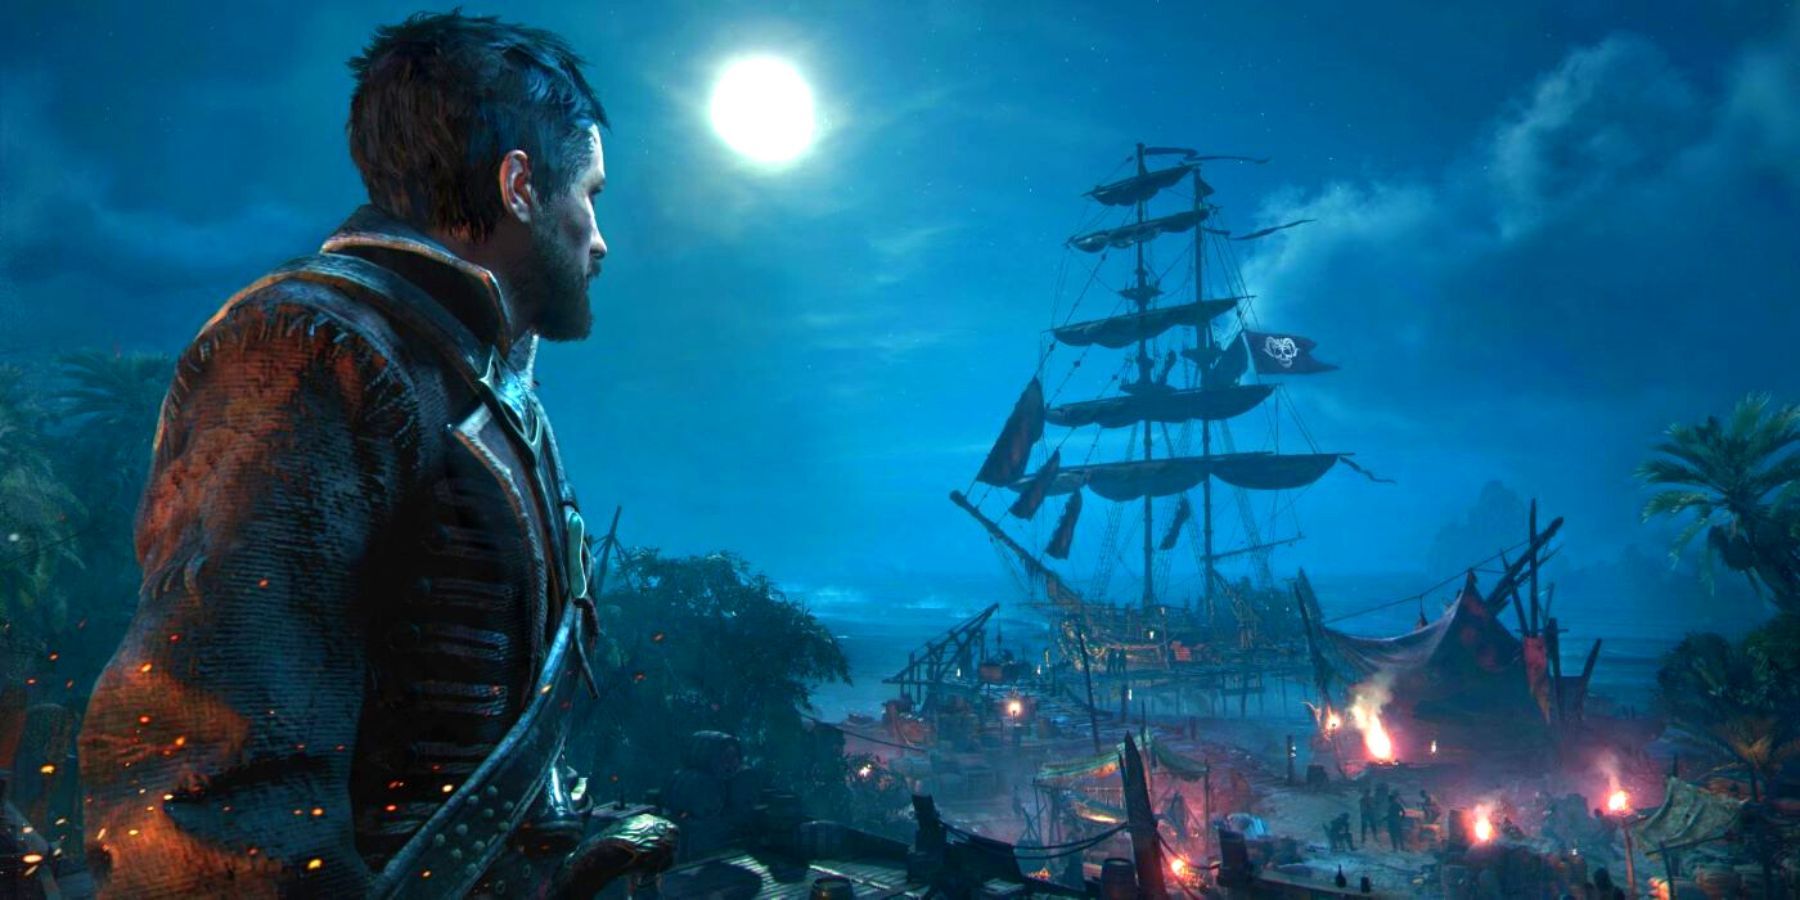 A pirate and ship at night in Skull and Bones